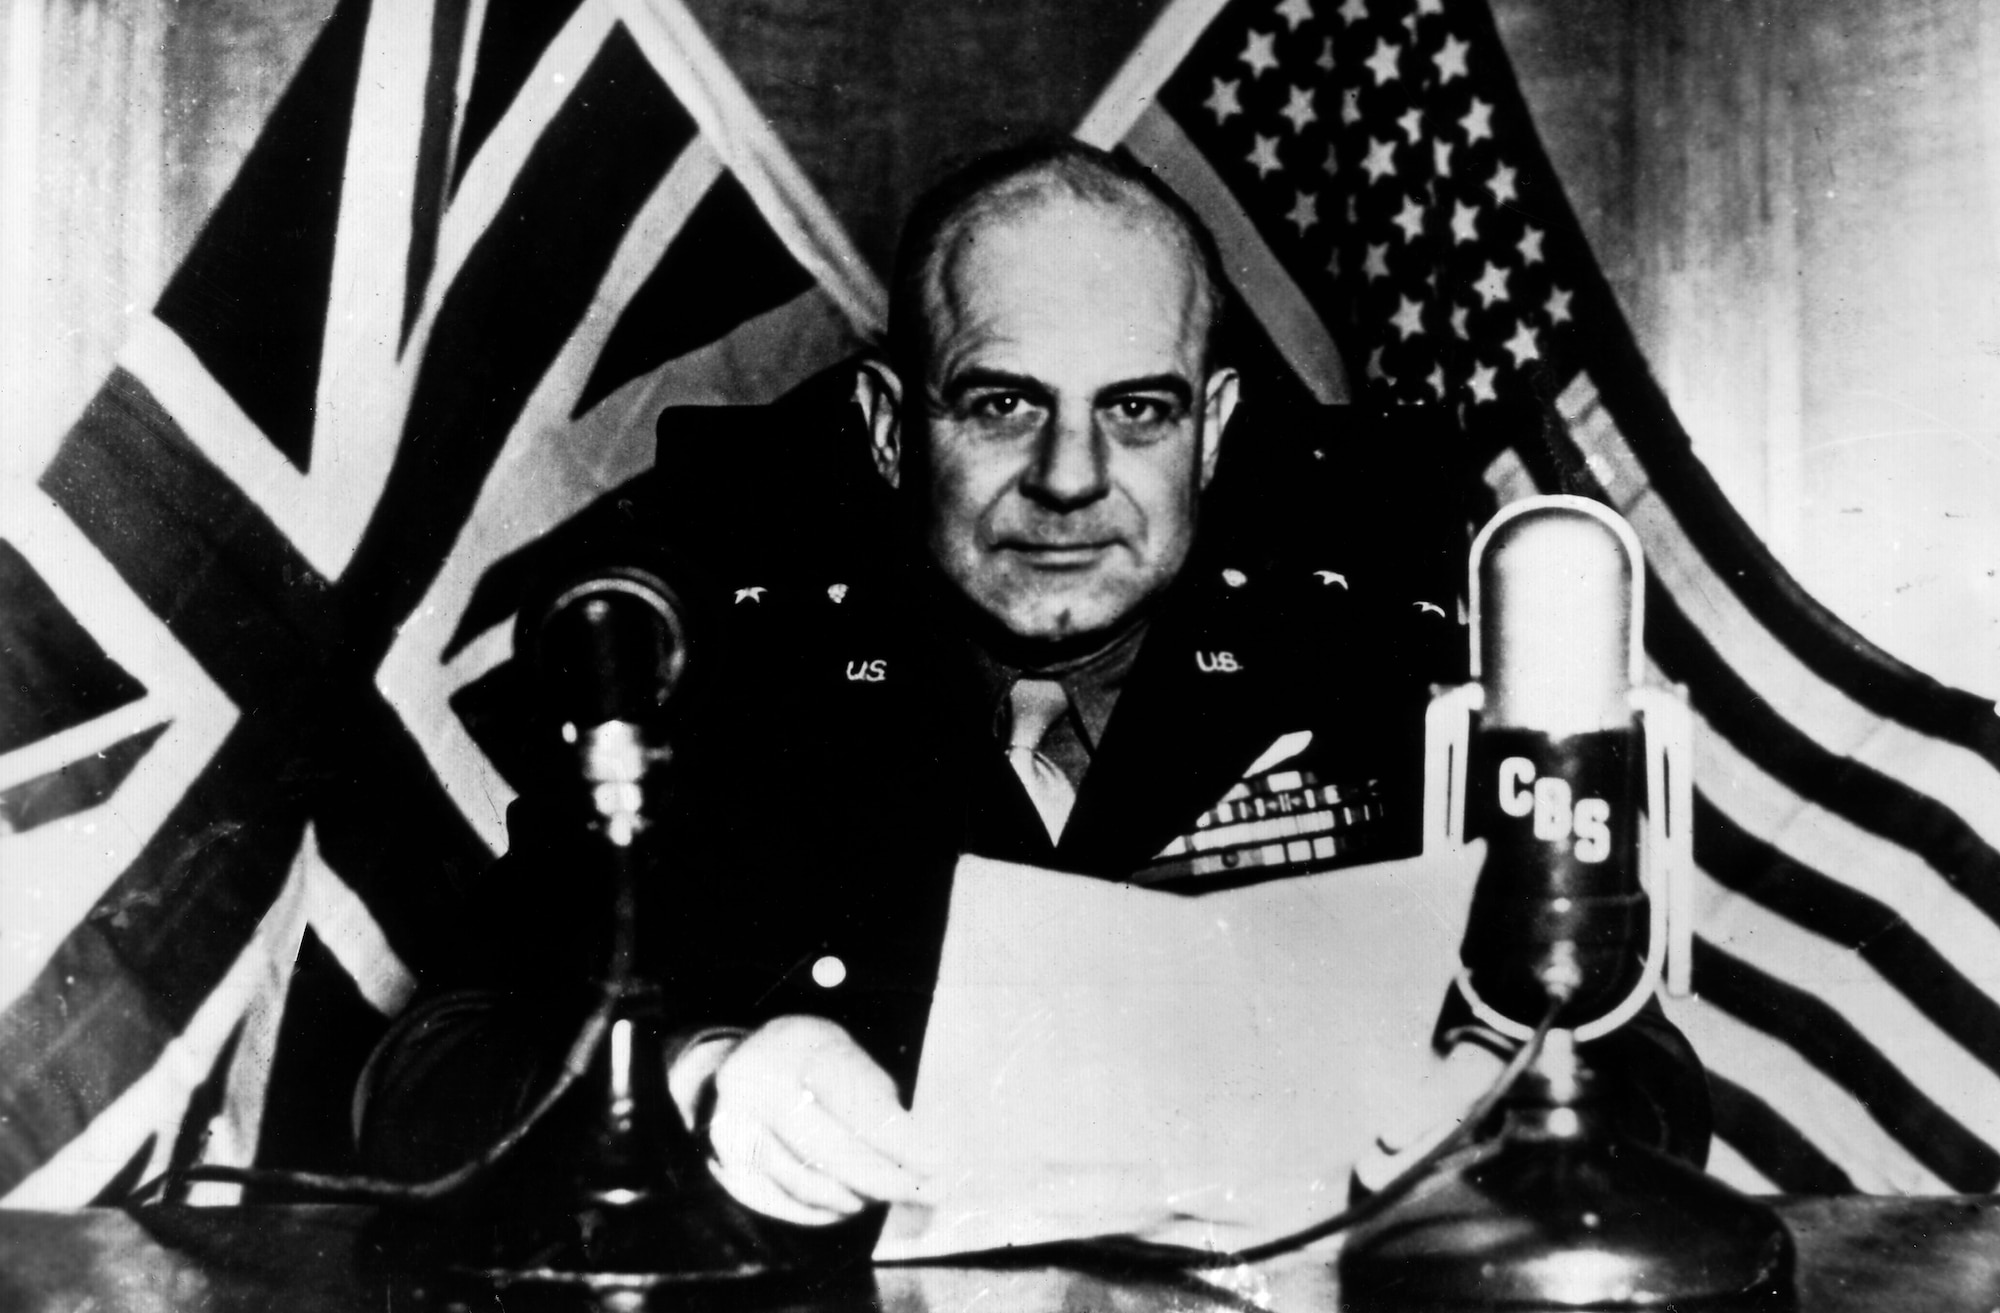 Lt. Gen. James H. Doolittle, commander of Army Air Forces Eighth Air Force, speaks on a British radio program observing the launch of the U.S. aircraft carrier USS Shangri-La. General Doolittle reported that the 8th AF knocked out more than 1,500 German fighter planes and dropped more than 24,000 tons of bombs on Germany in April, 1944. (U.S. Air Force photo)